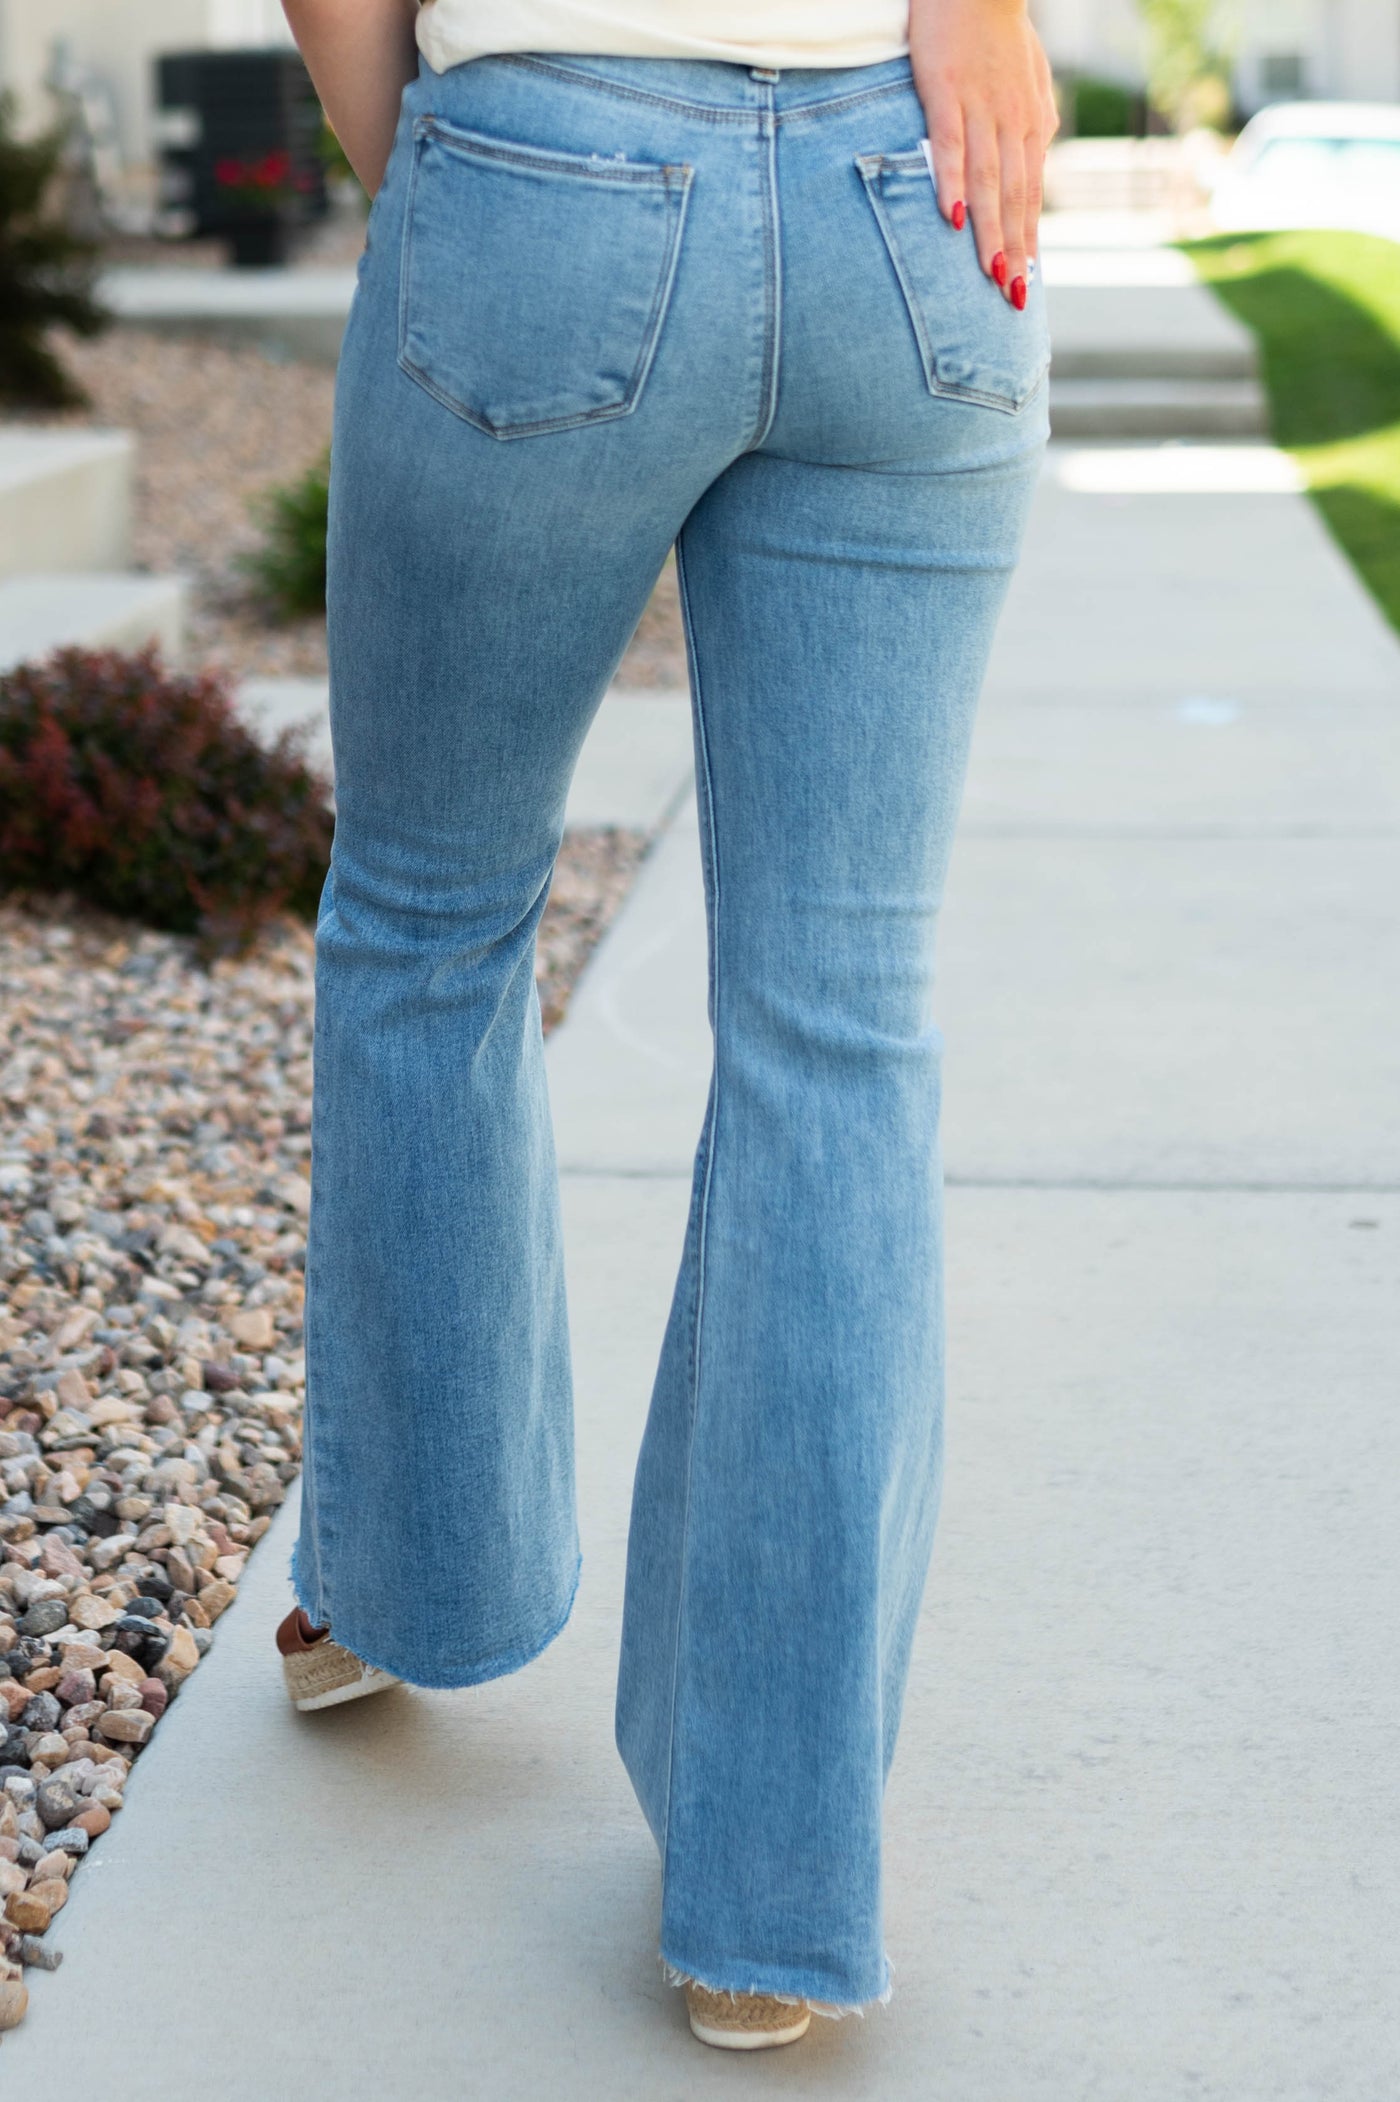 Back view of bootcut jeans